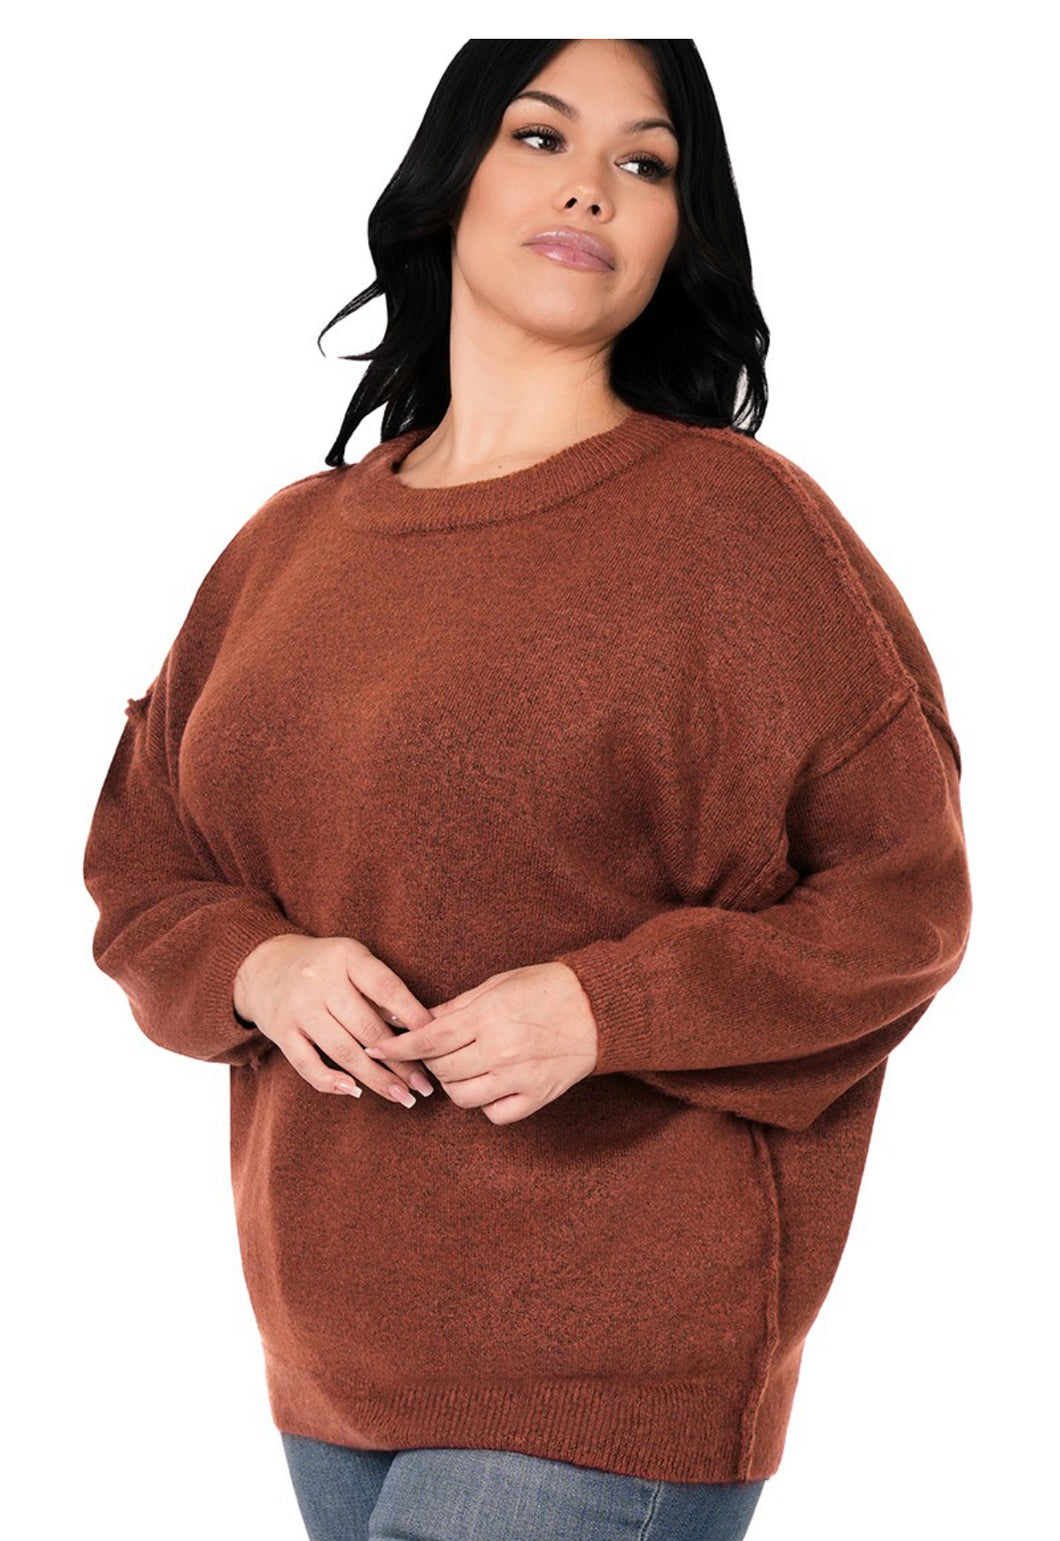 The Candy Curvy Sweater